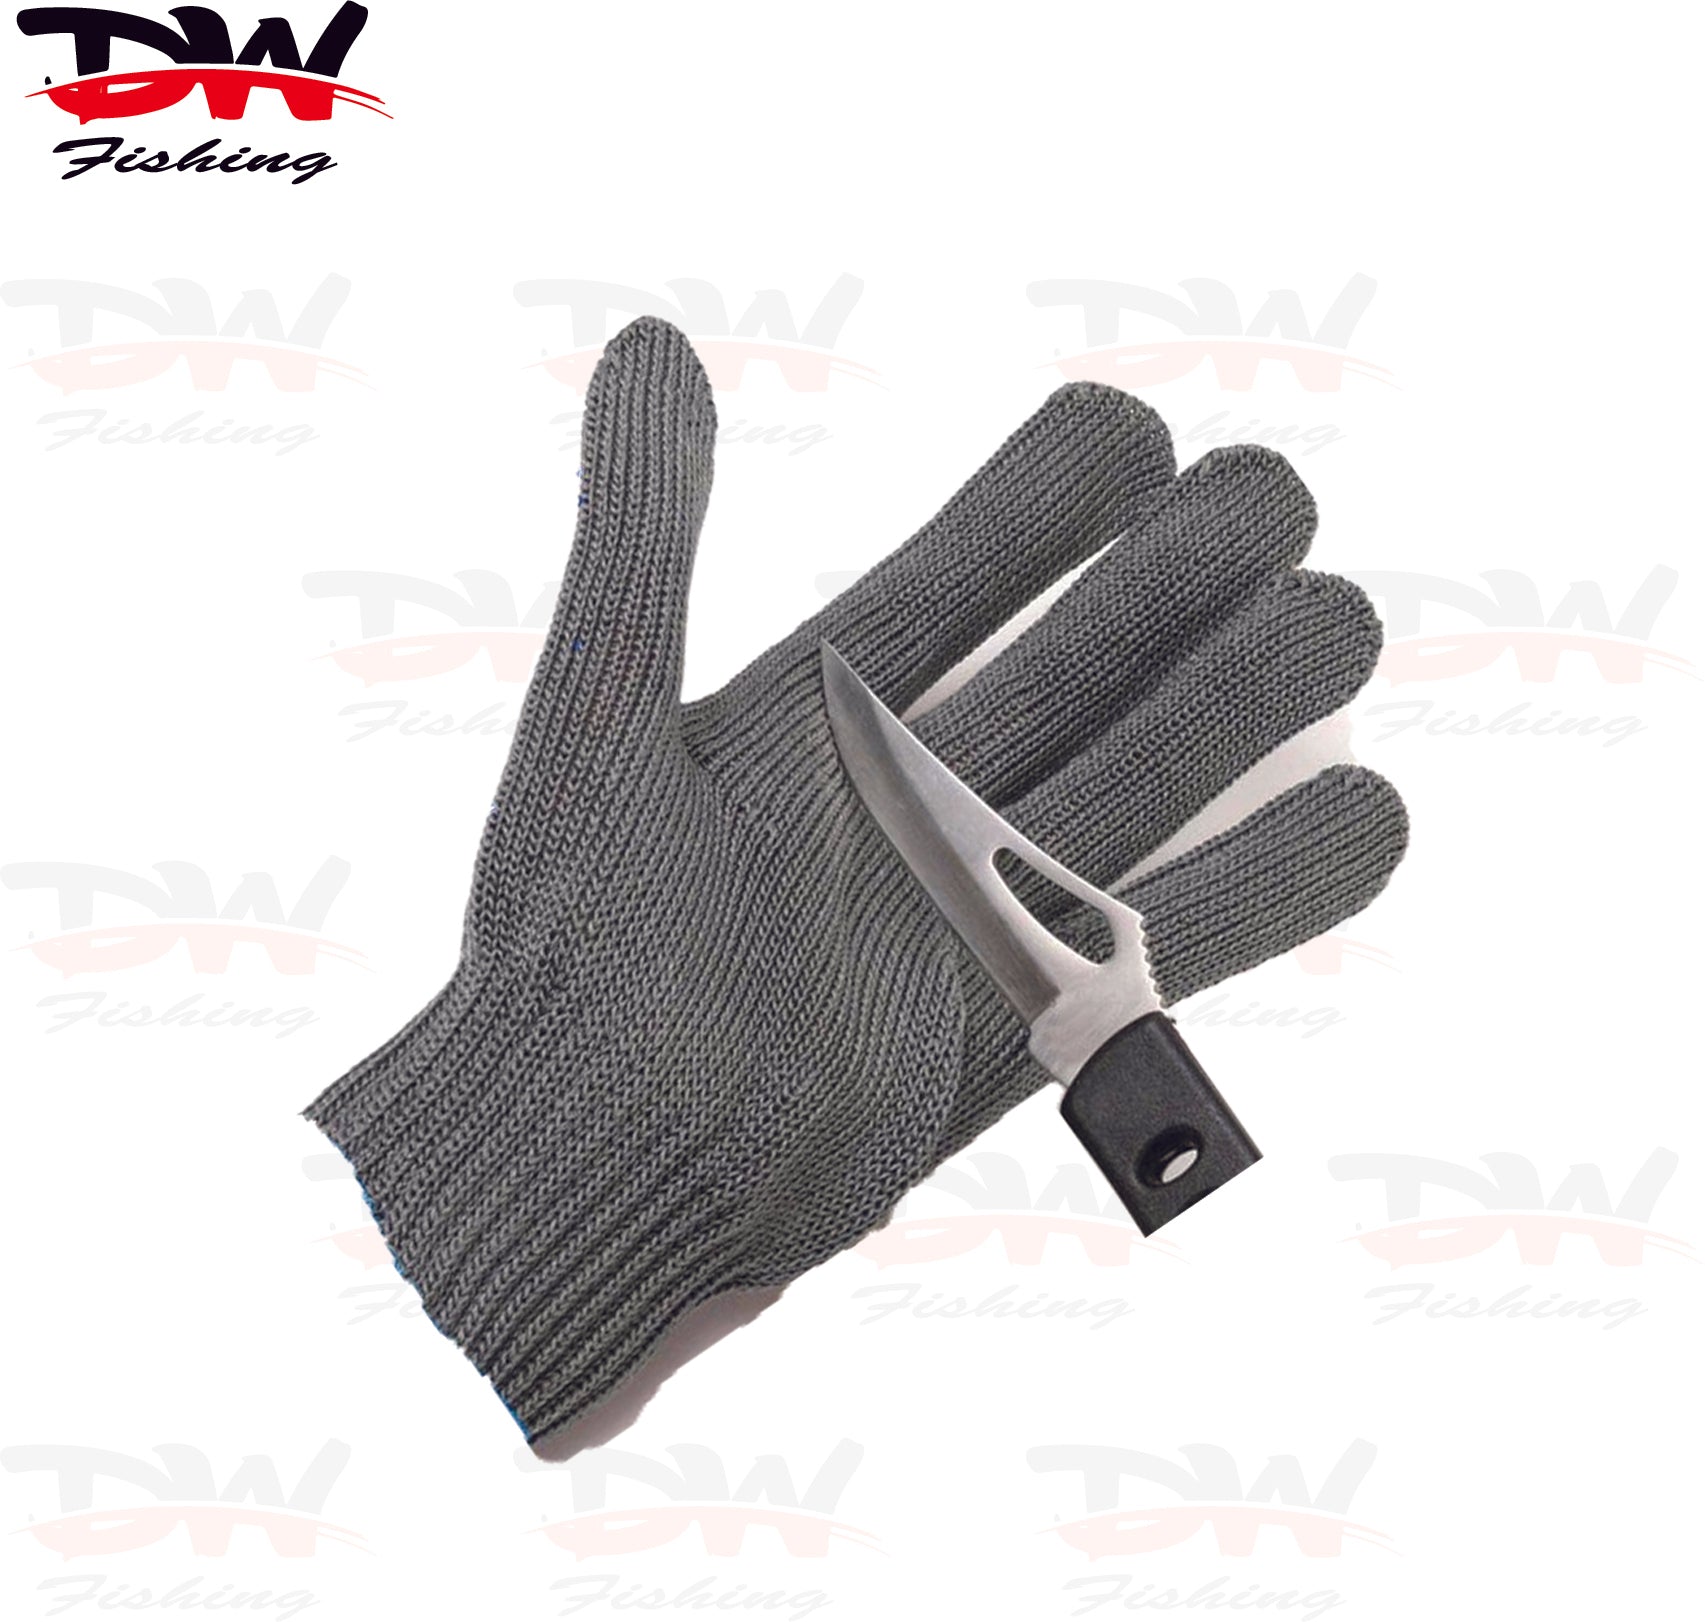 Stainless Steel Filleting Gloves, Fishing Apparel